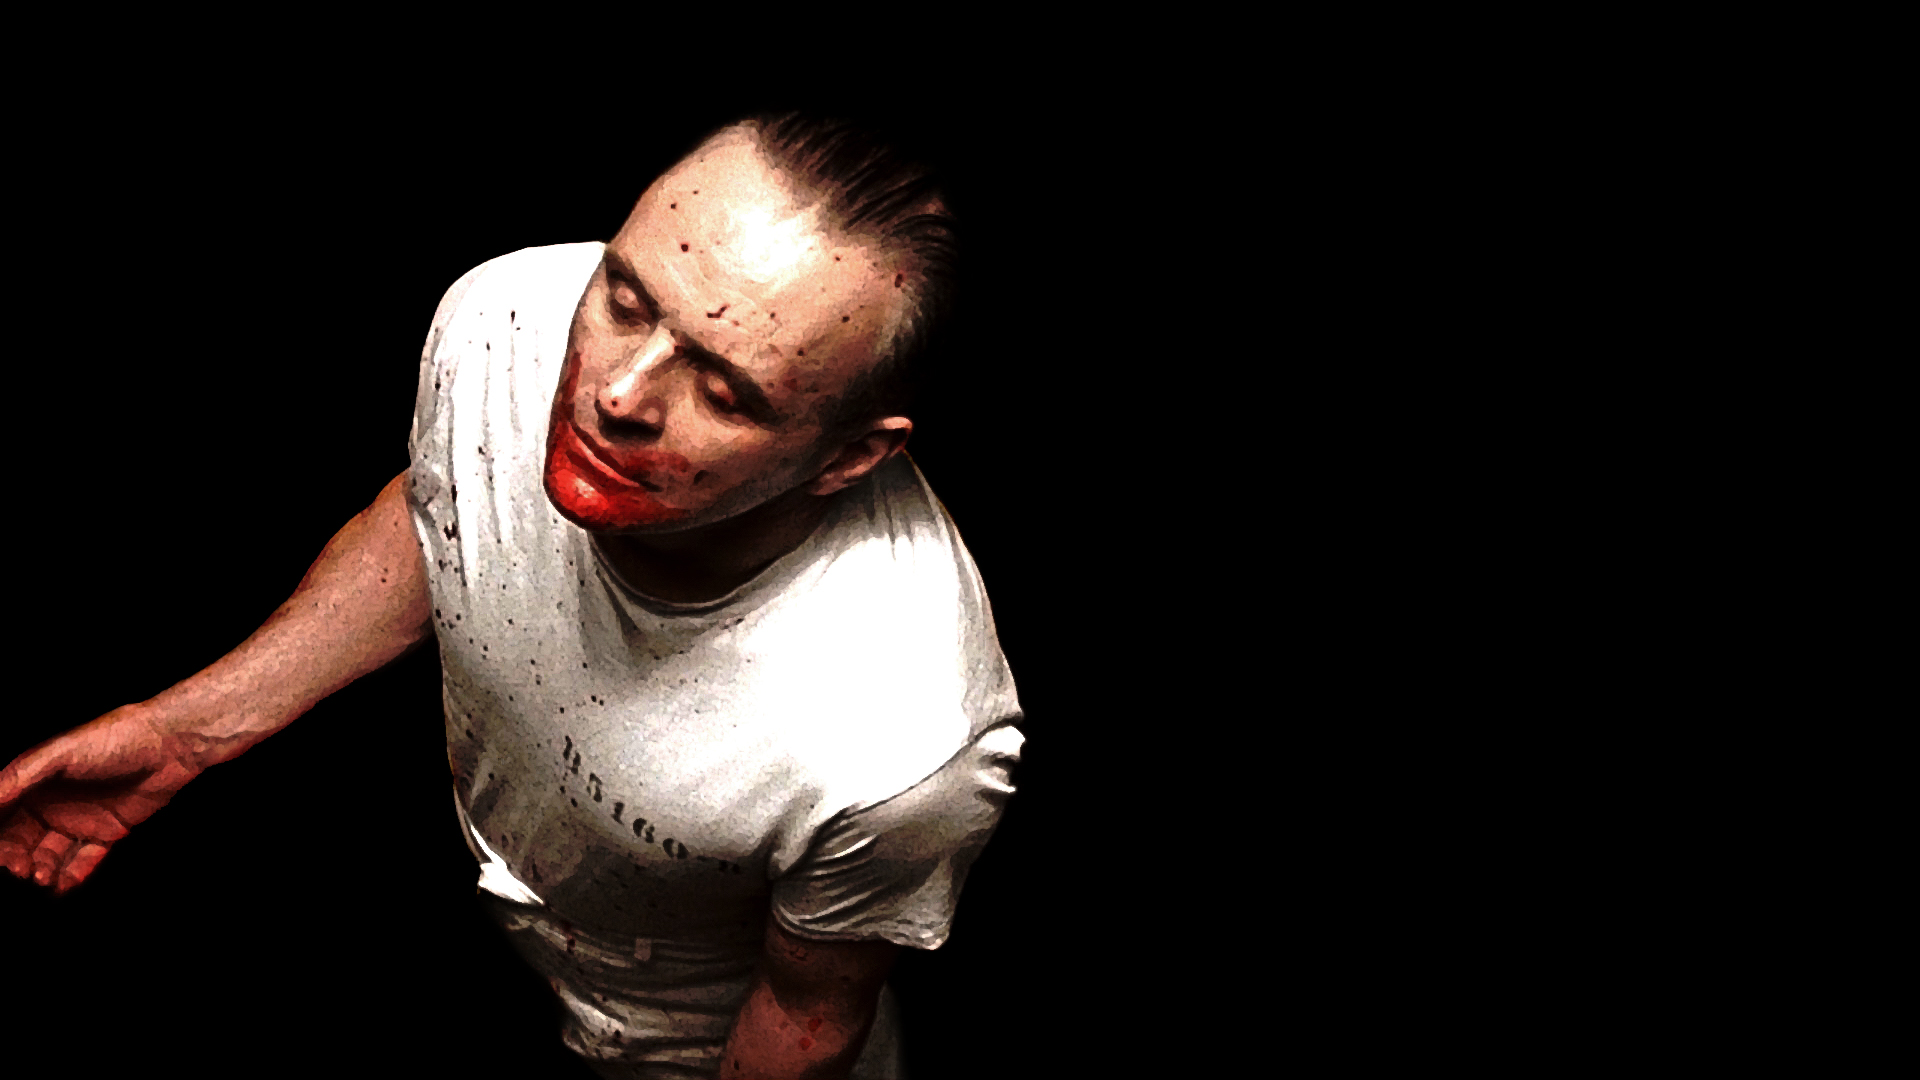 Movie The Silence Of The Lambs HD Wallpaper | Background Image